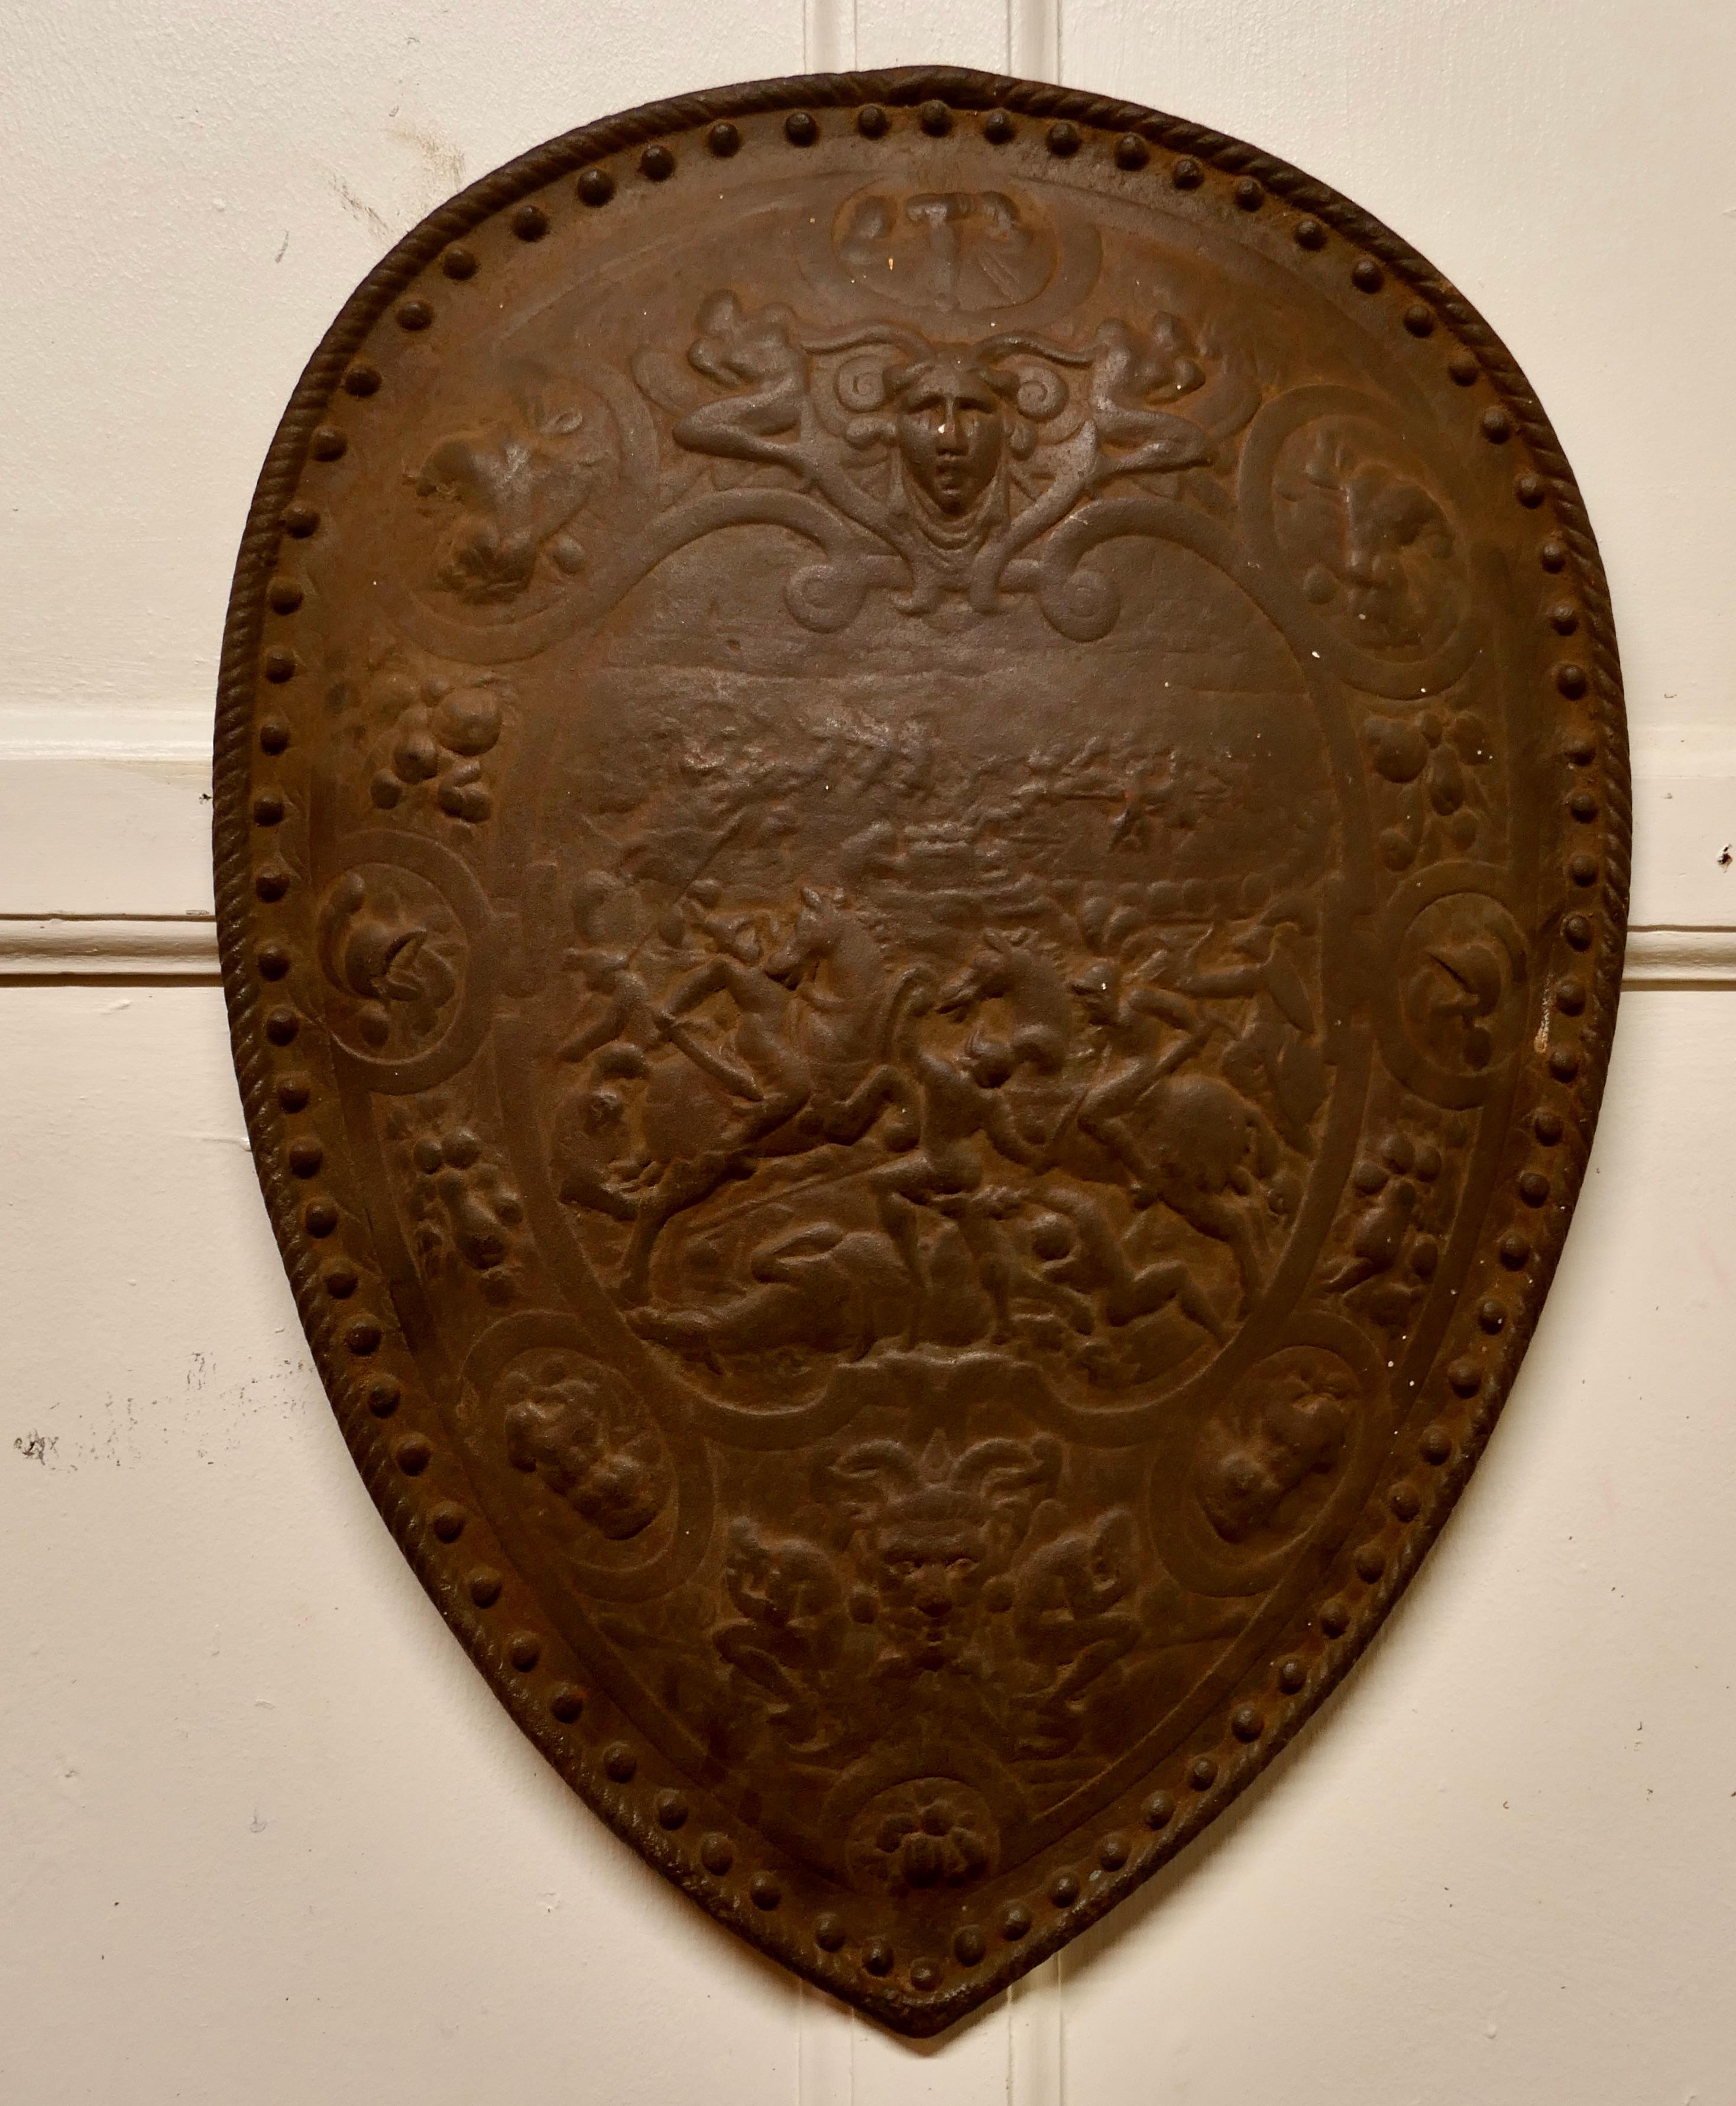 19th century iron wall hanging shield fire back

A Decorative Gothic wall hanging Shield made in solid cast Iron, the shield is decorated with mythical Warriors and beasts, there are 2 images of the green man

The shield is a very heavy